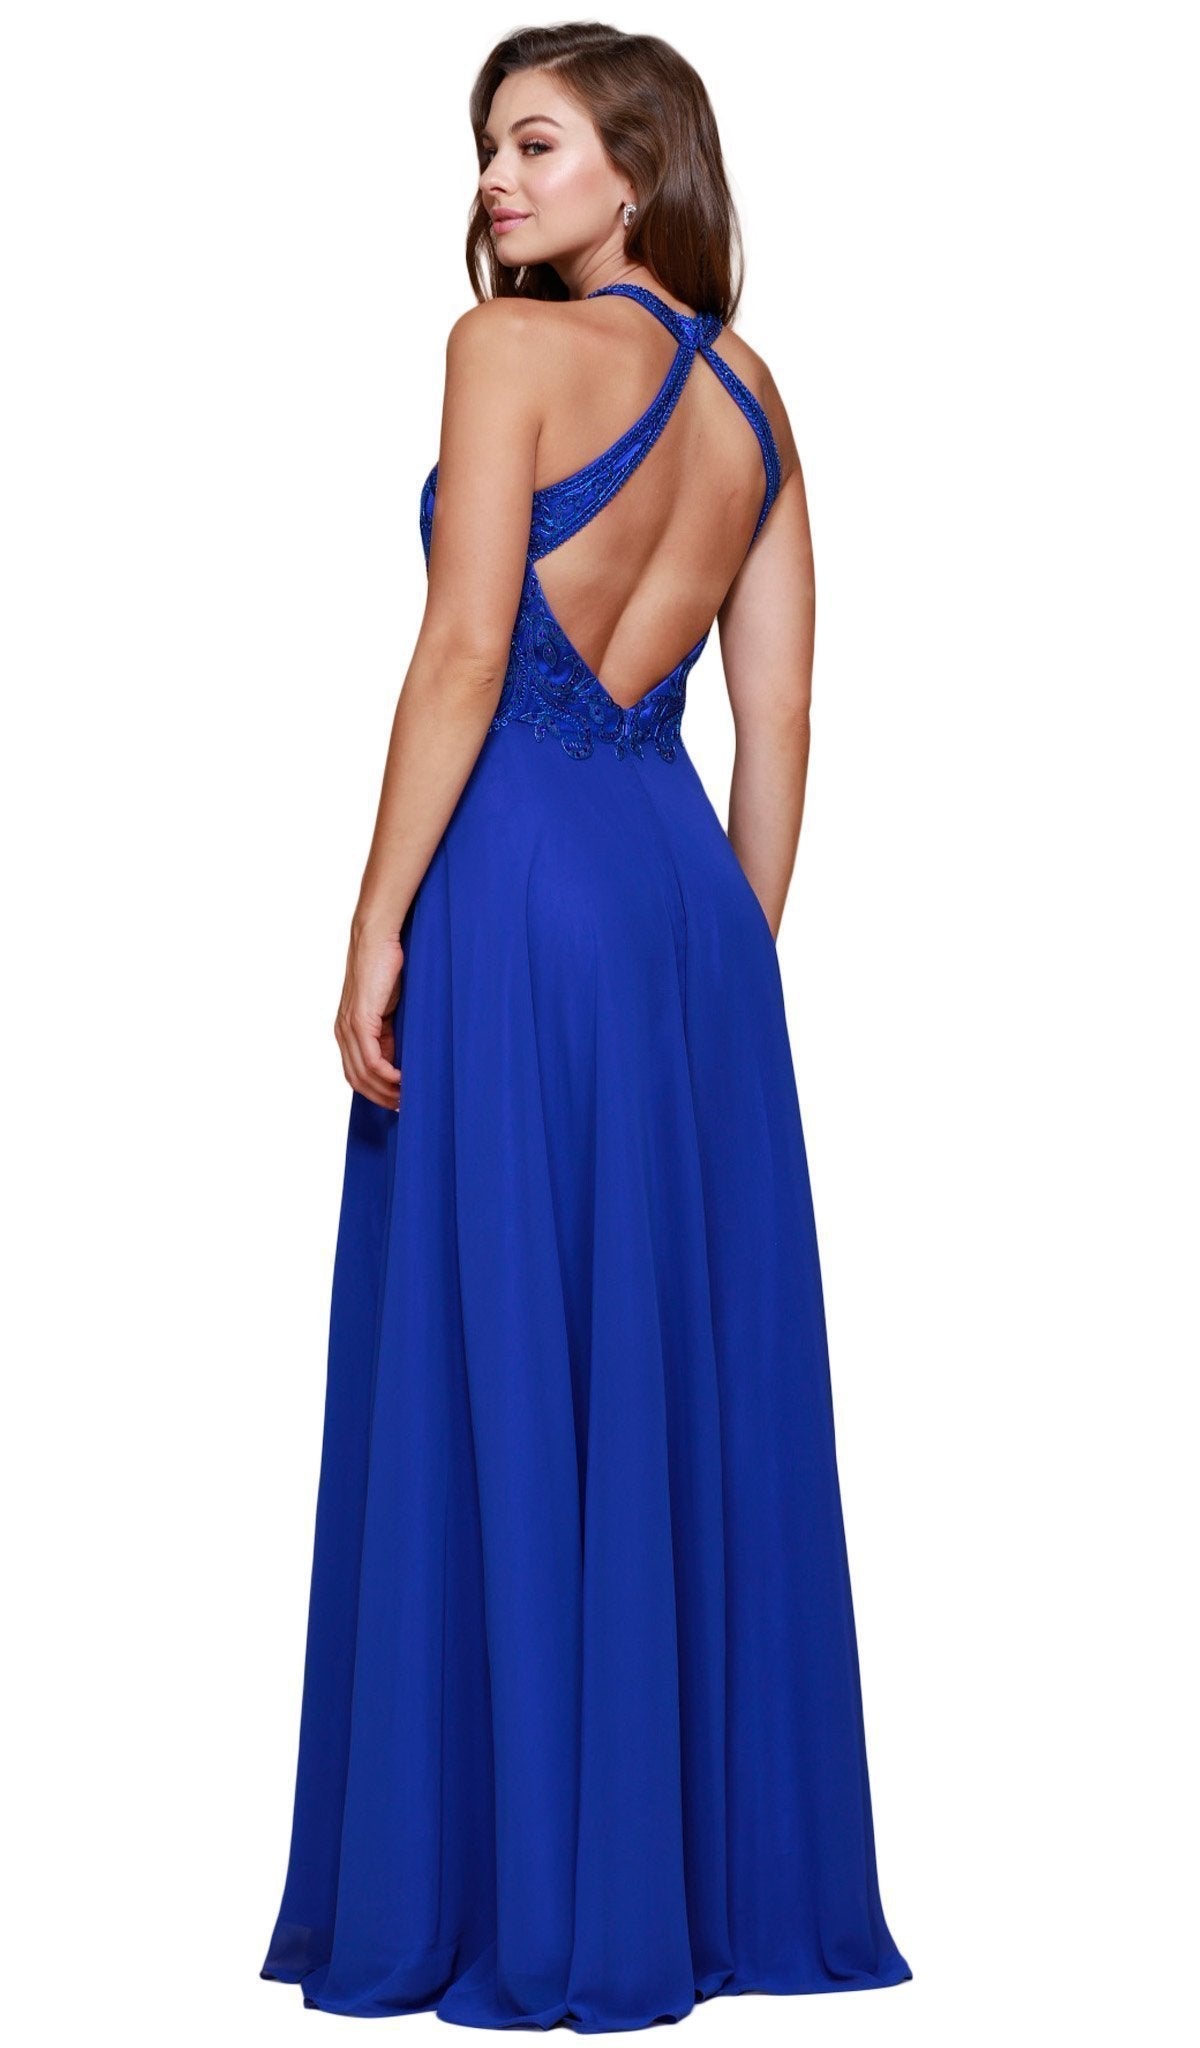 Nox Anabel - J117 Embroidered Halter Chiffon A-line Dress Special Occasion Dress